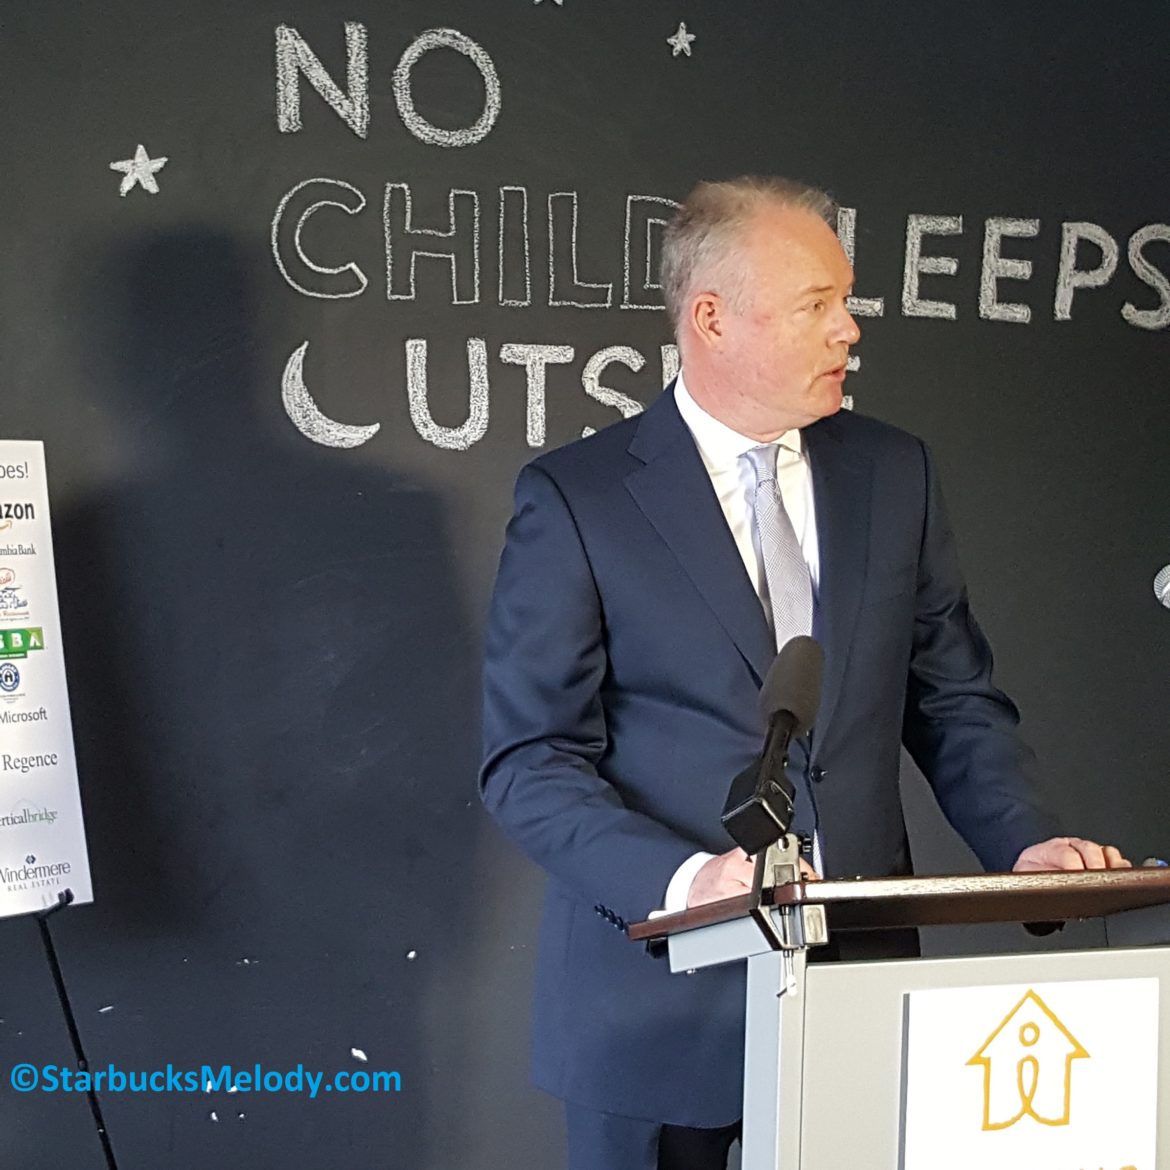 Starbucks Donates Millions to Mary’s Place, a Seattle shelter for homeless families.